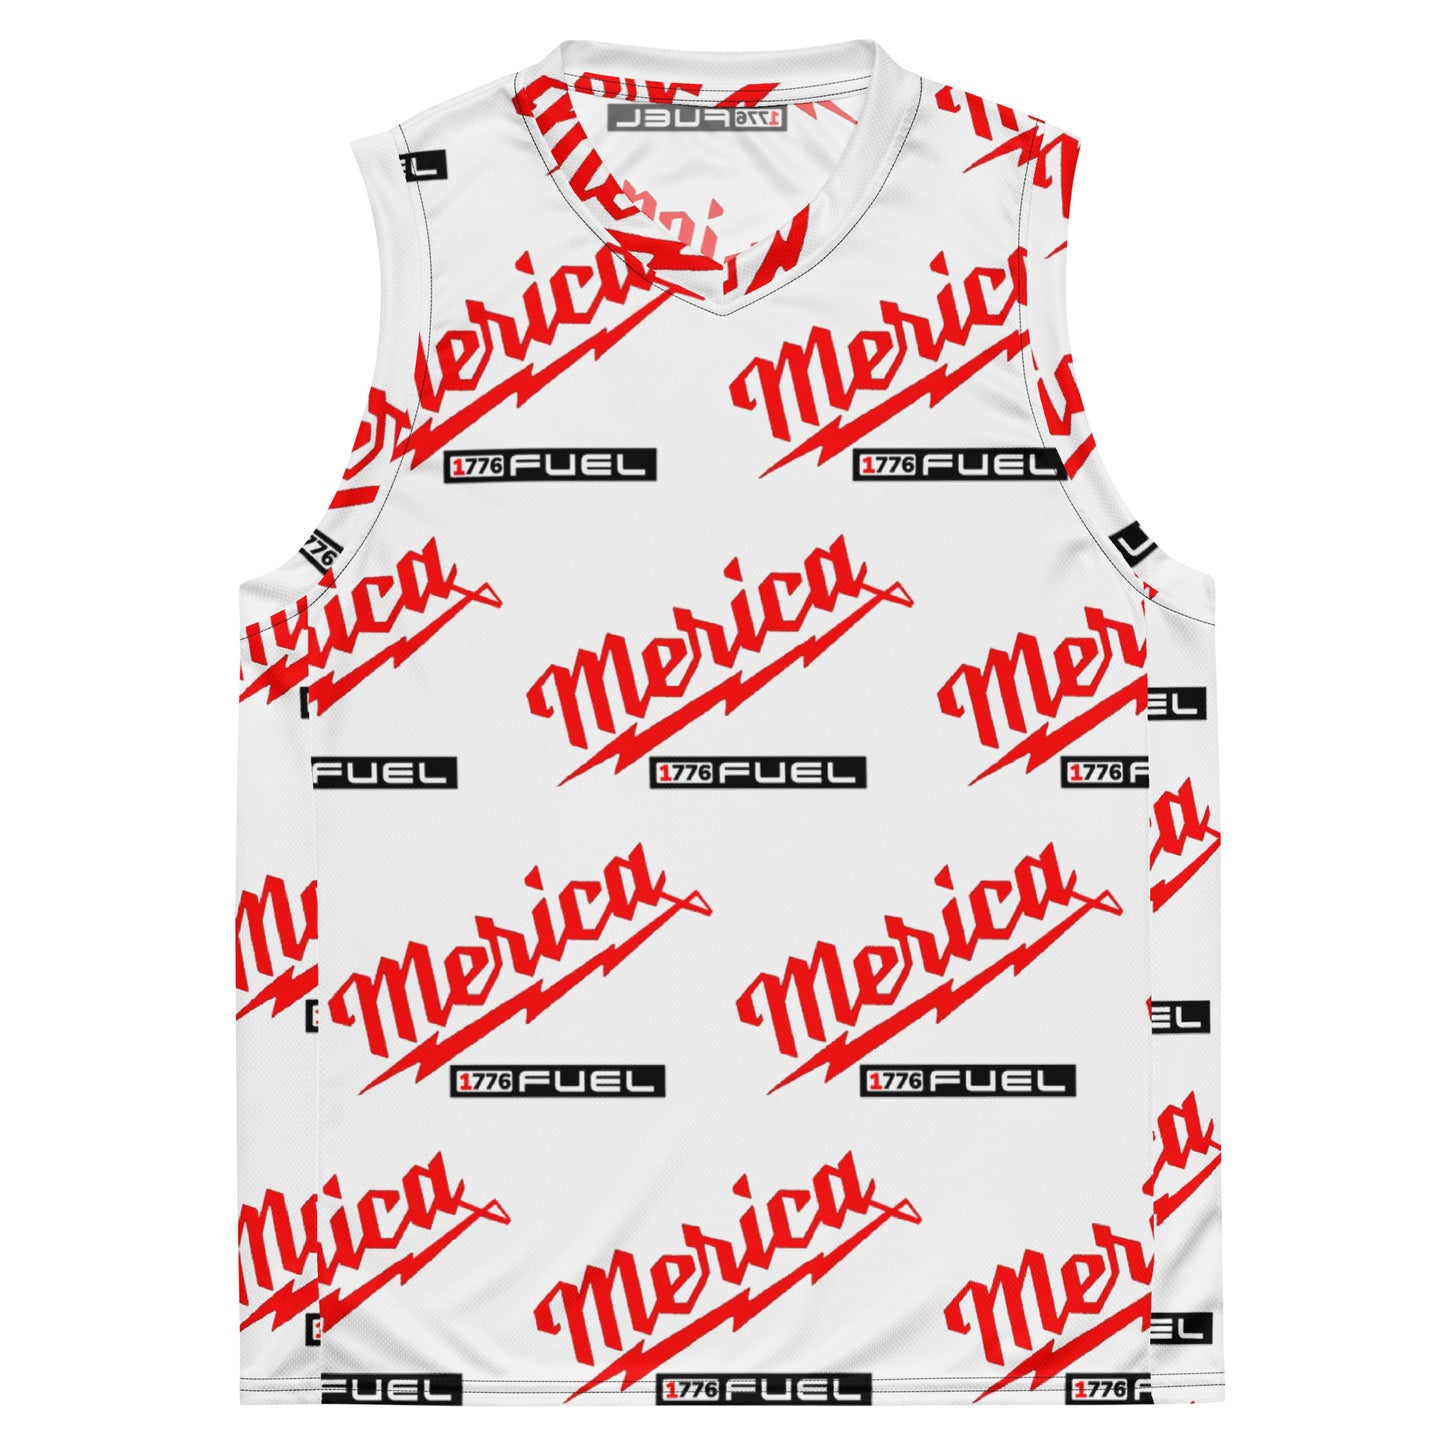 ‘Merica Fuel Recycled unisex basketball jersey